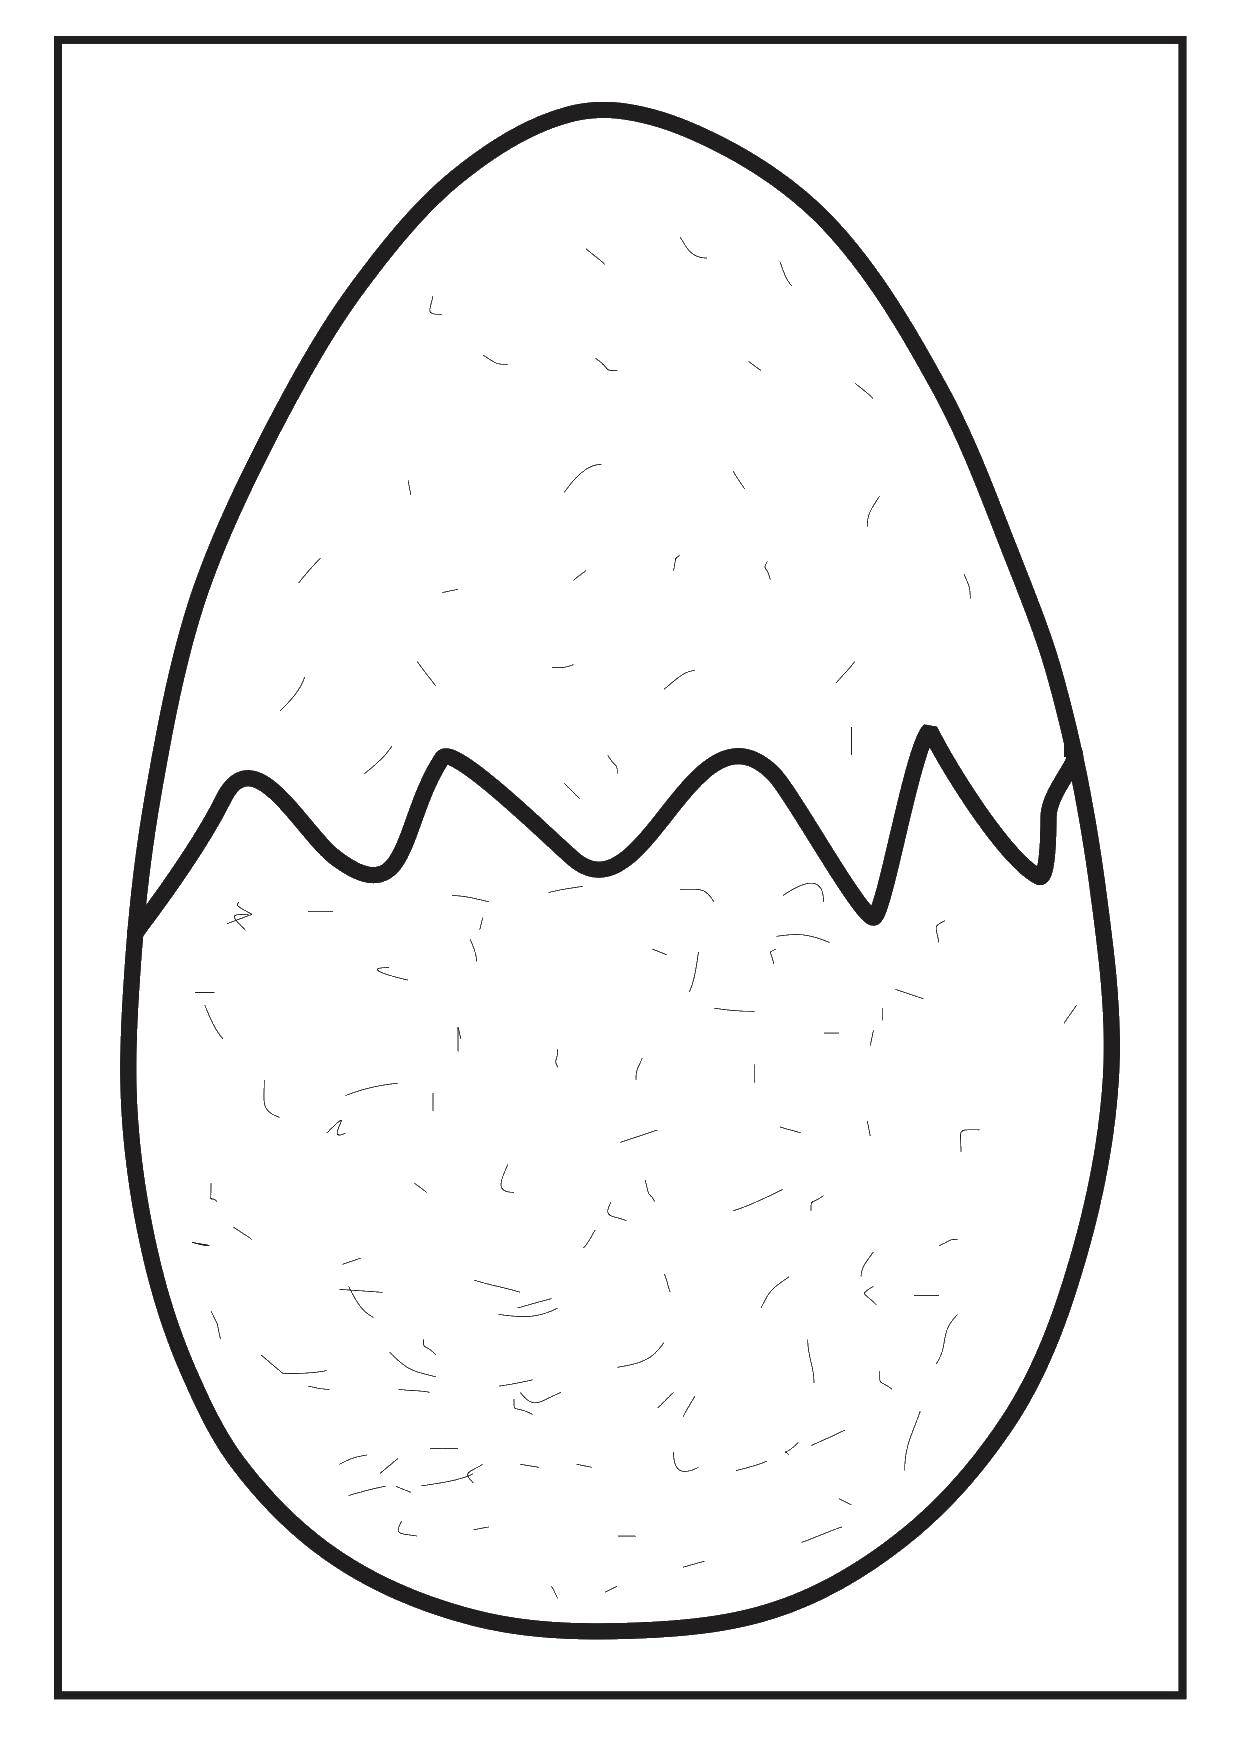 Coloring Egg. Category Patterns for coloring eggs. Tags:  egg patterns, stencil.